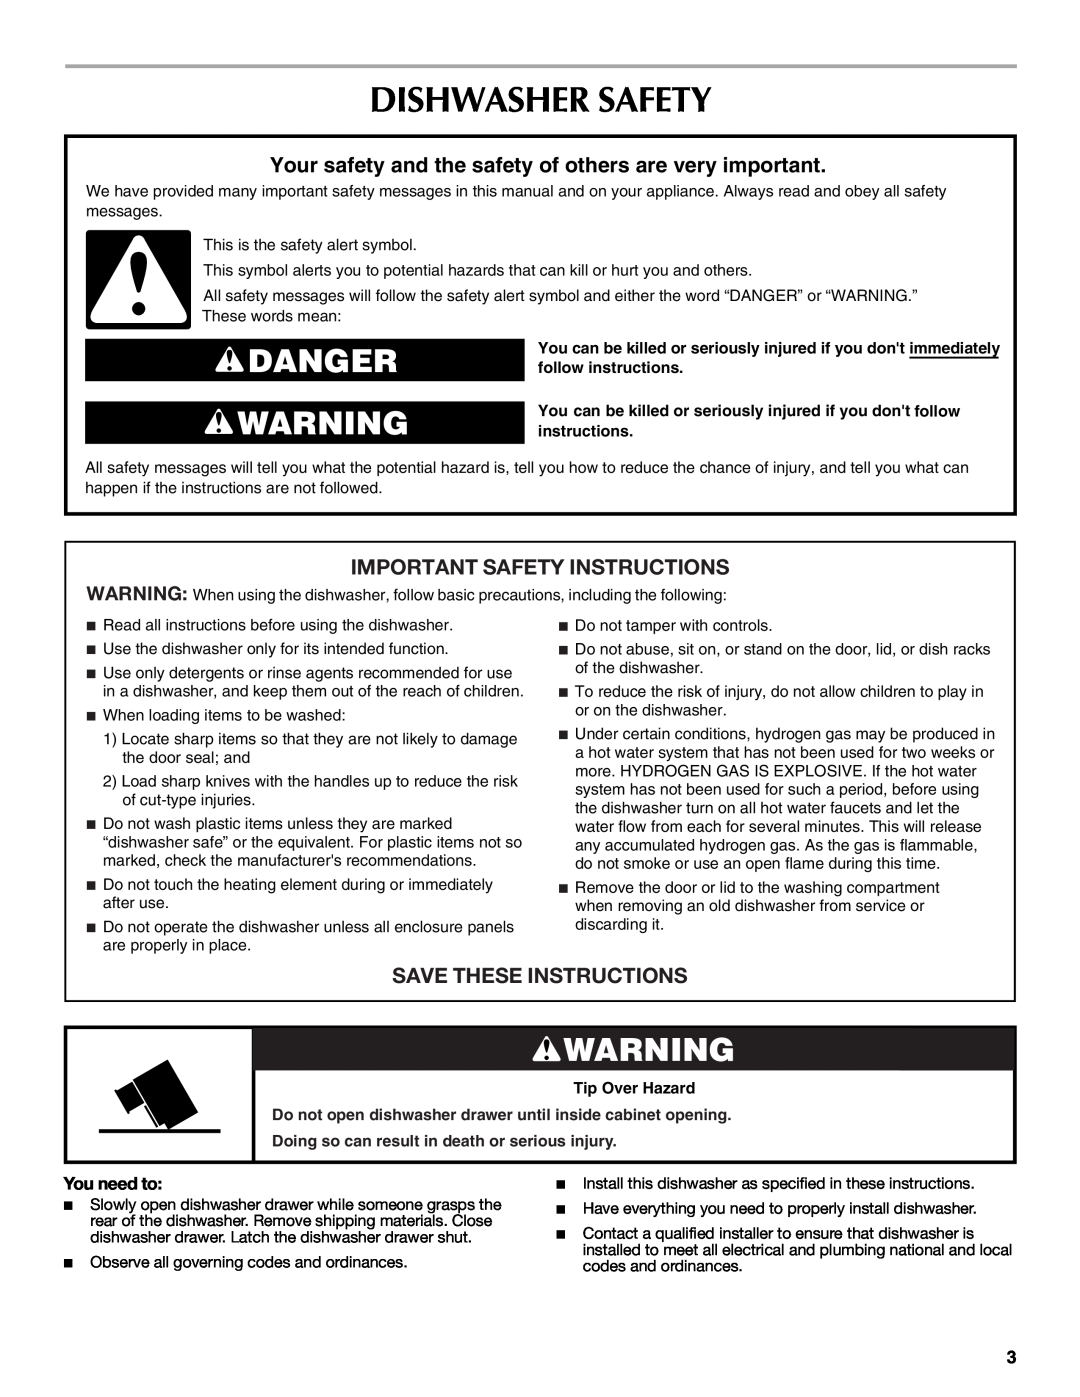 Maytag W10185071B Dishwasher Safety, Danger, Important Safety Instructions, Save These Instructions 